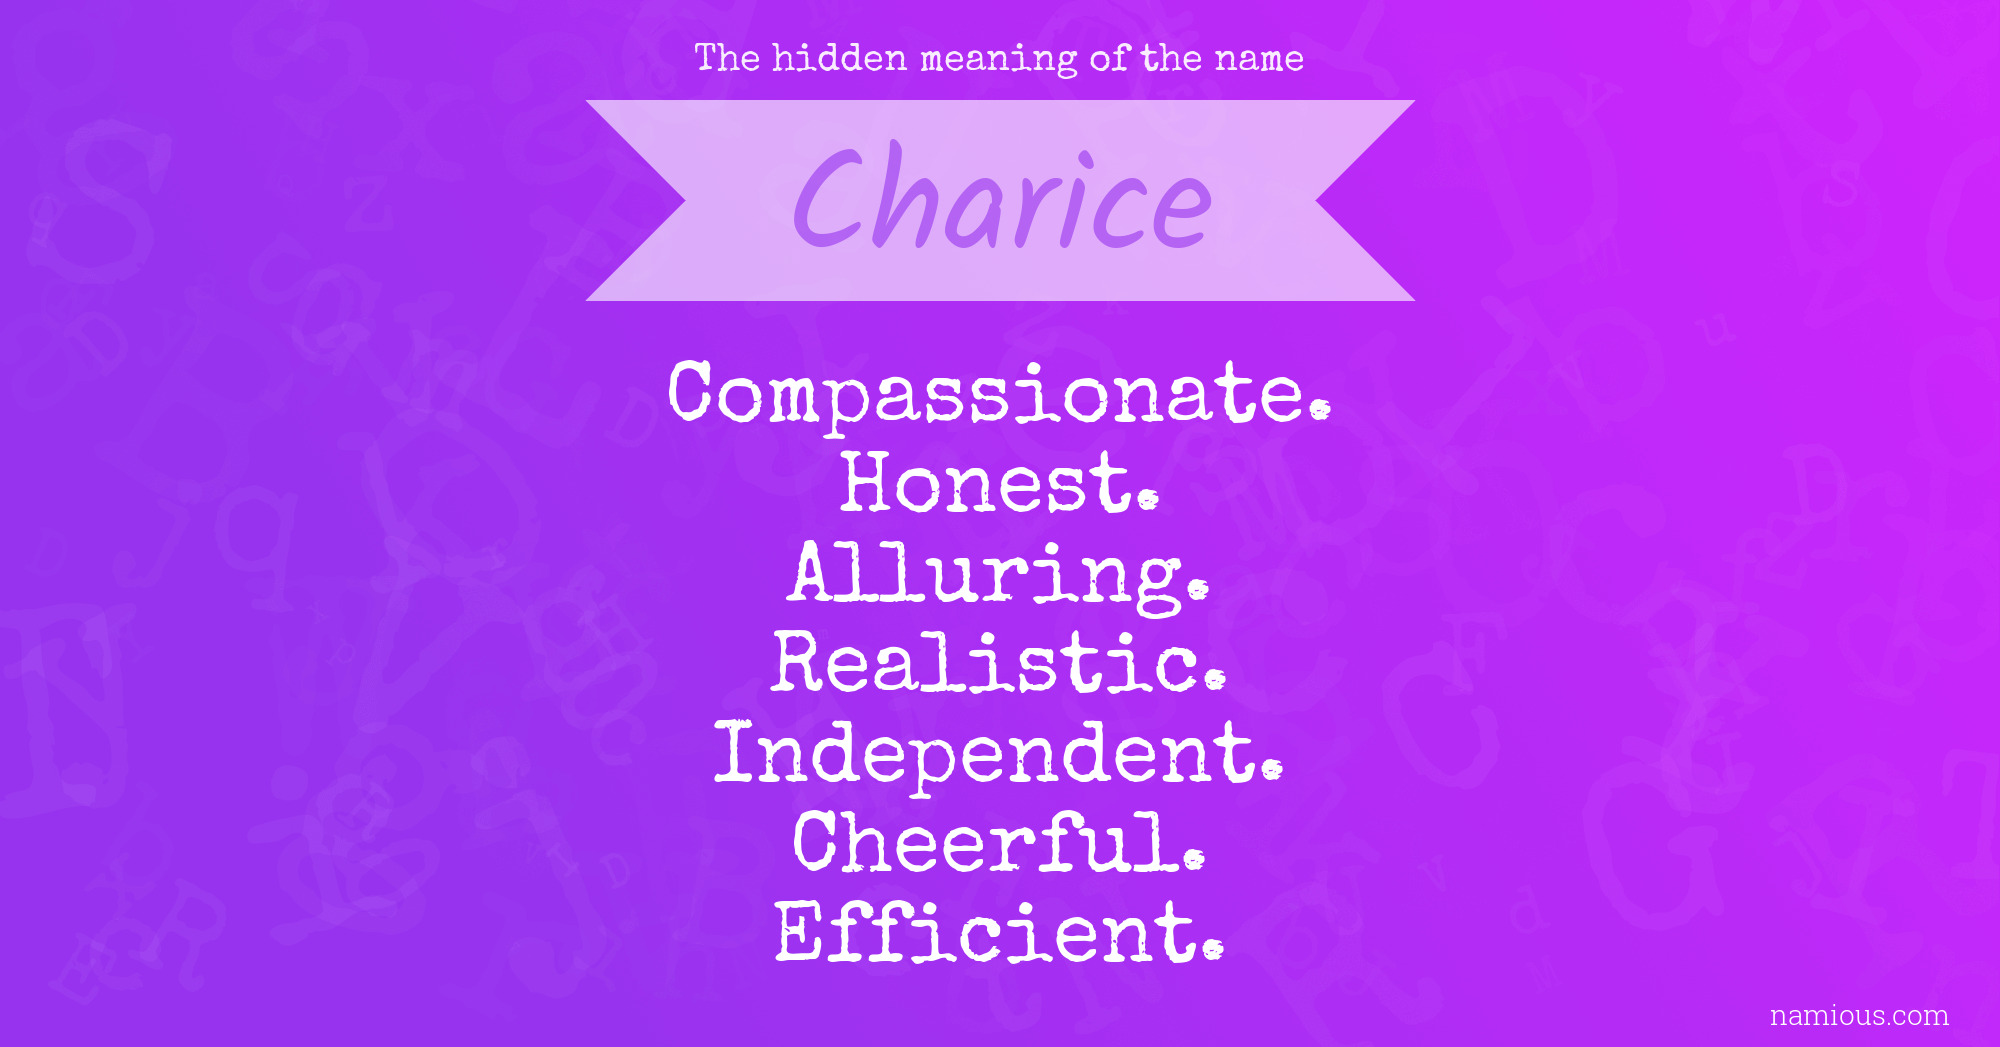 The hidden meaning of the name Charice